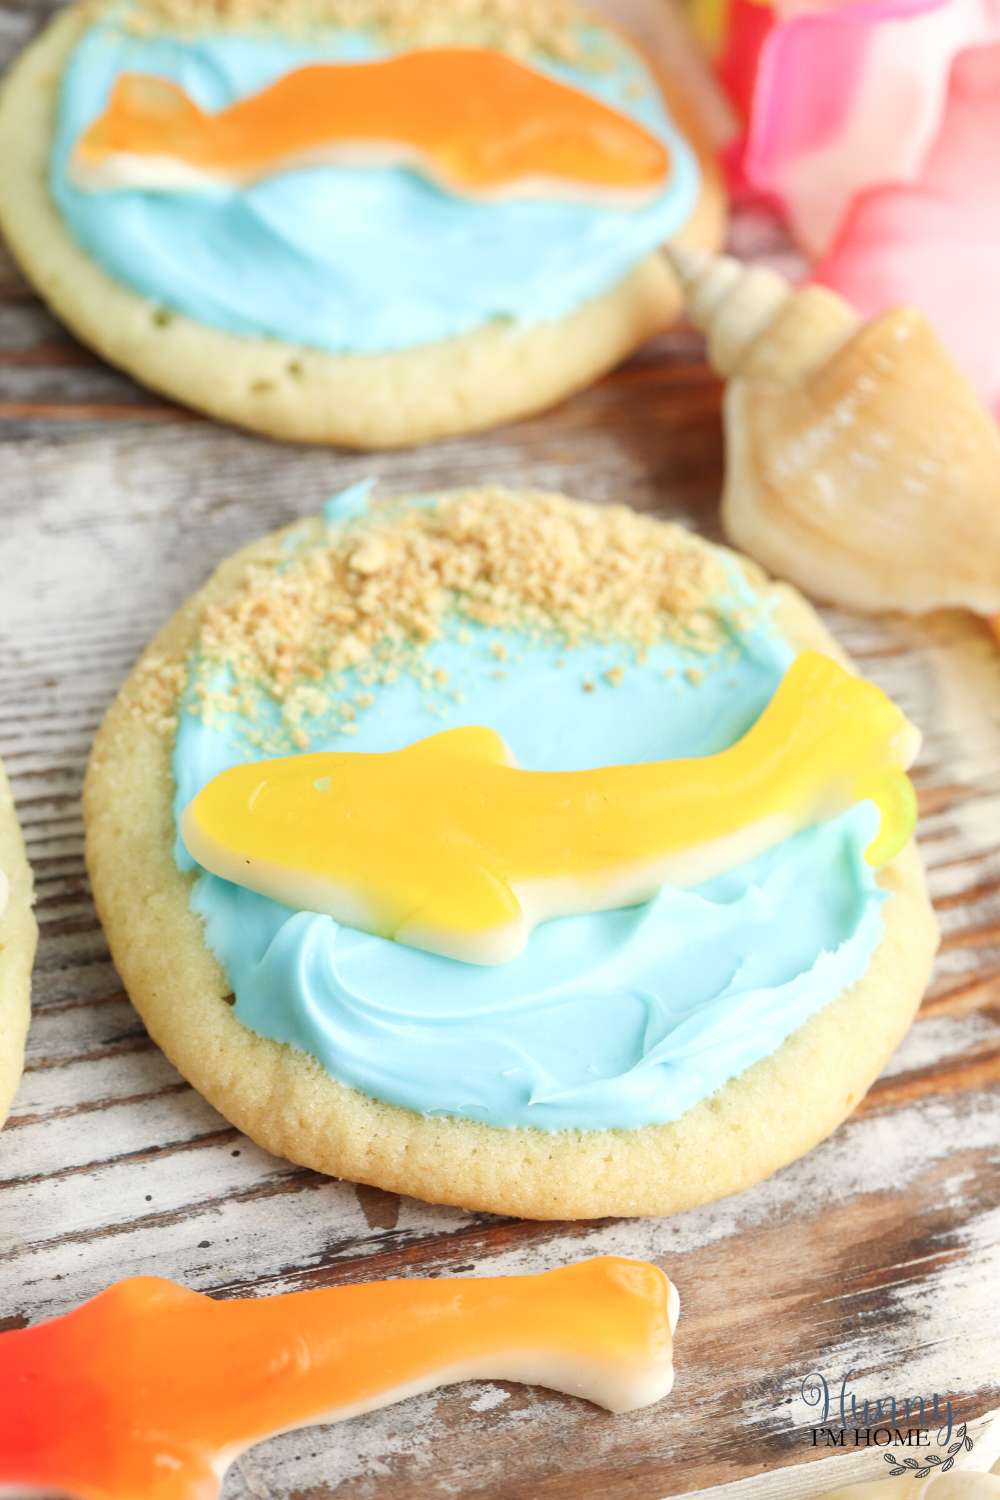 Seashell Cookies Recipe - Beach Themed Party Food! - Must Have Mom